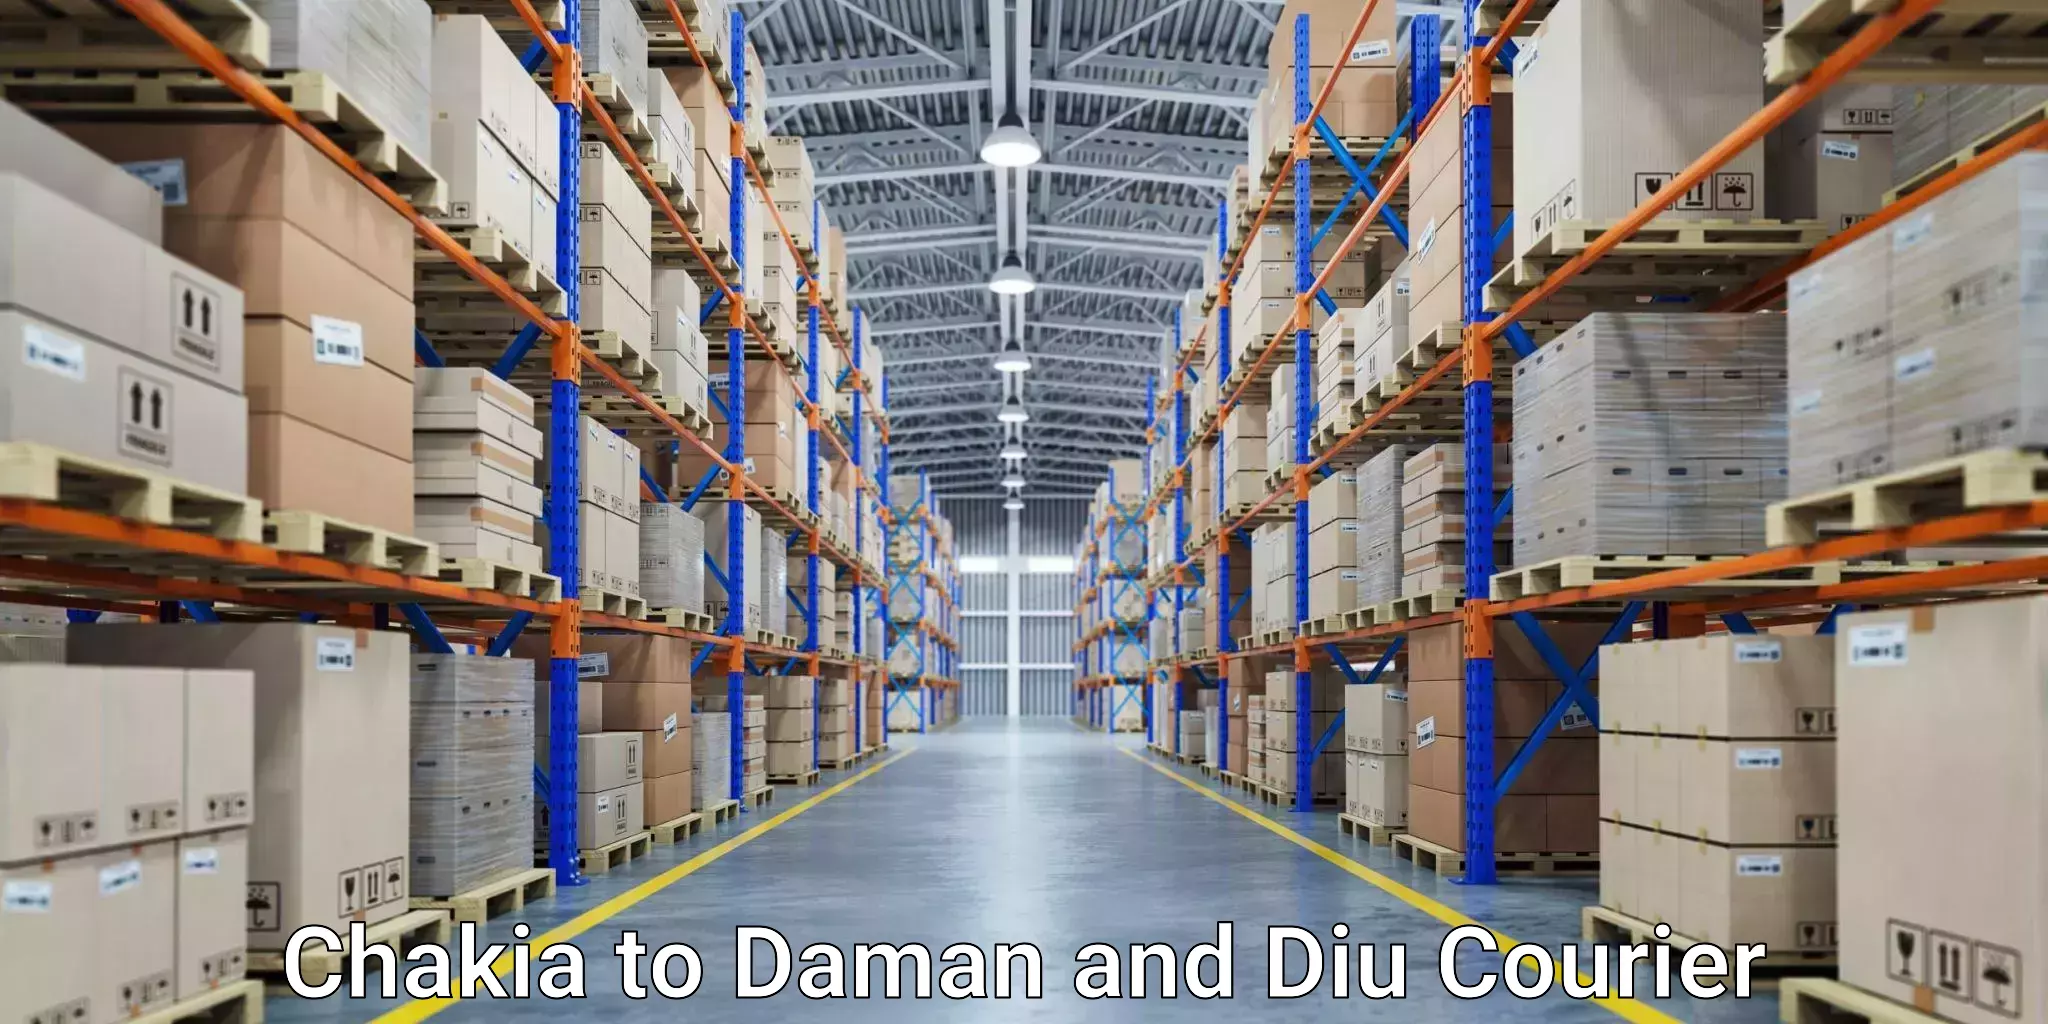 Advanced logistics management in Chakia to Daman and Diu